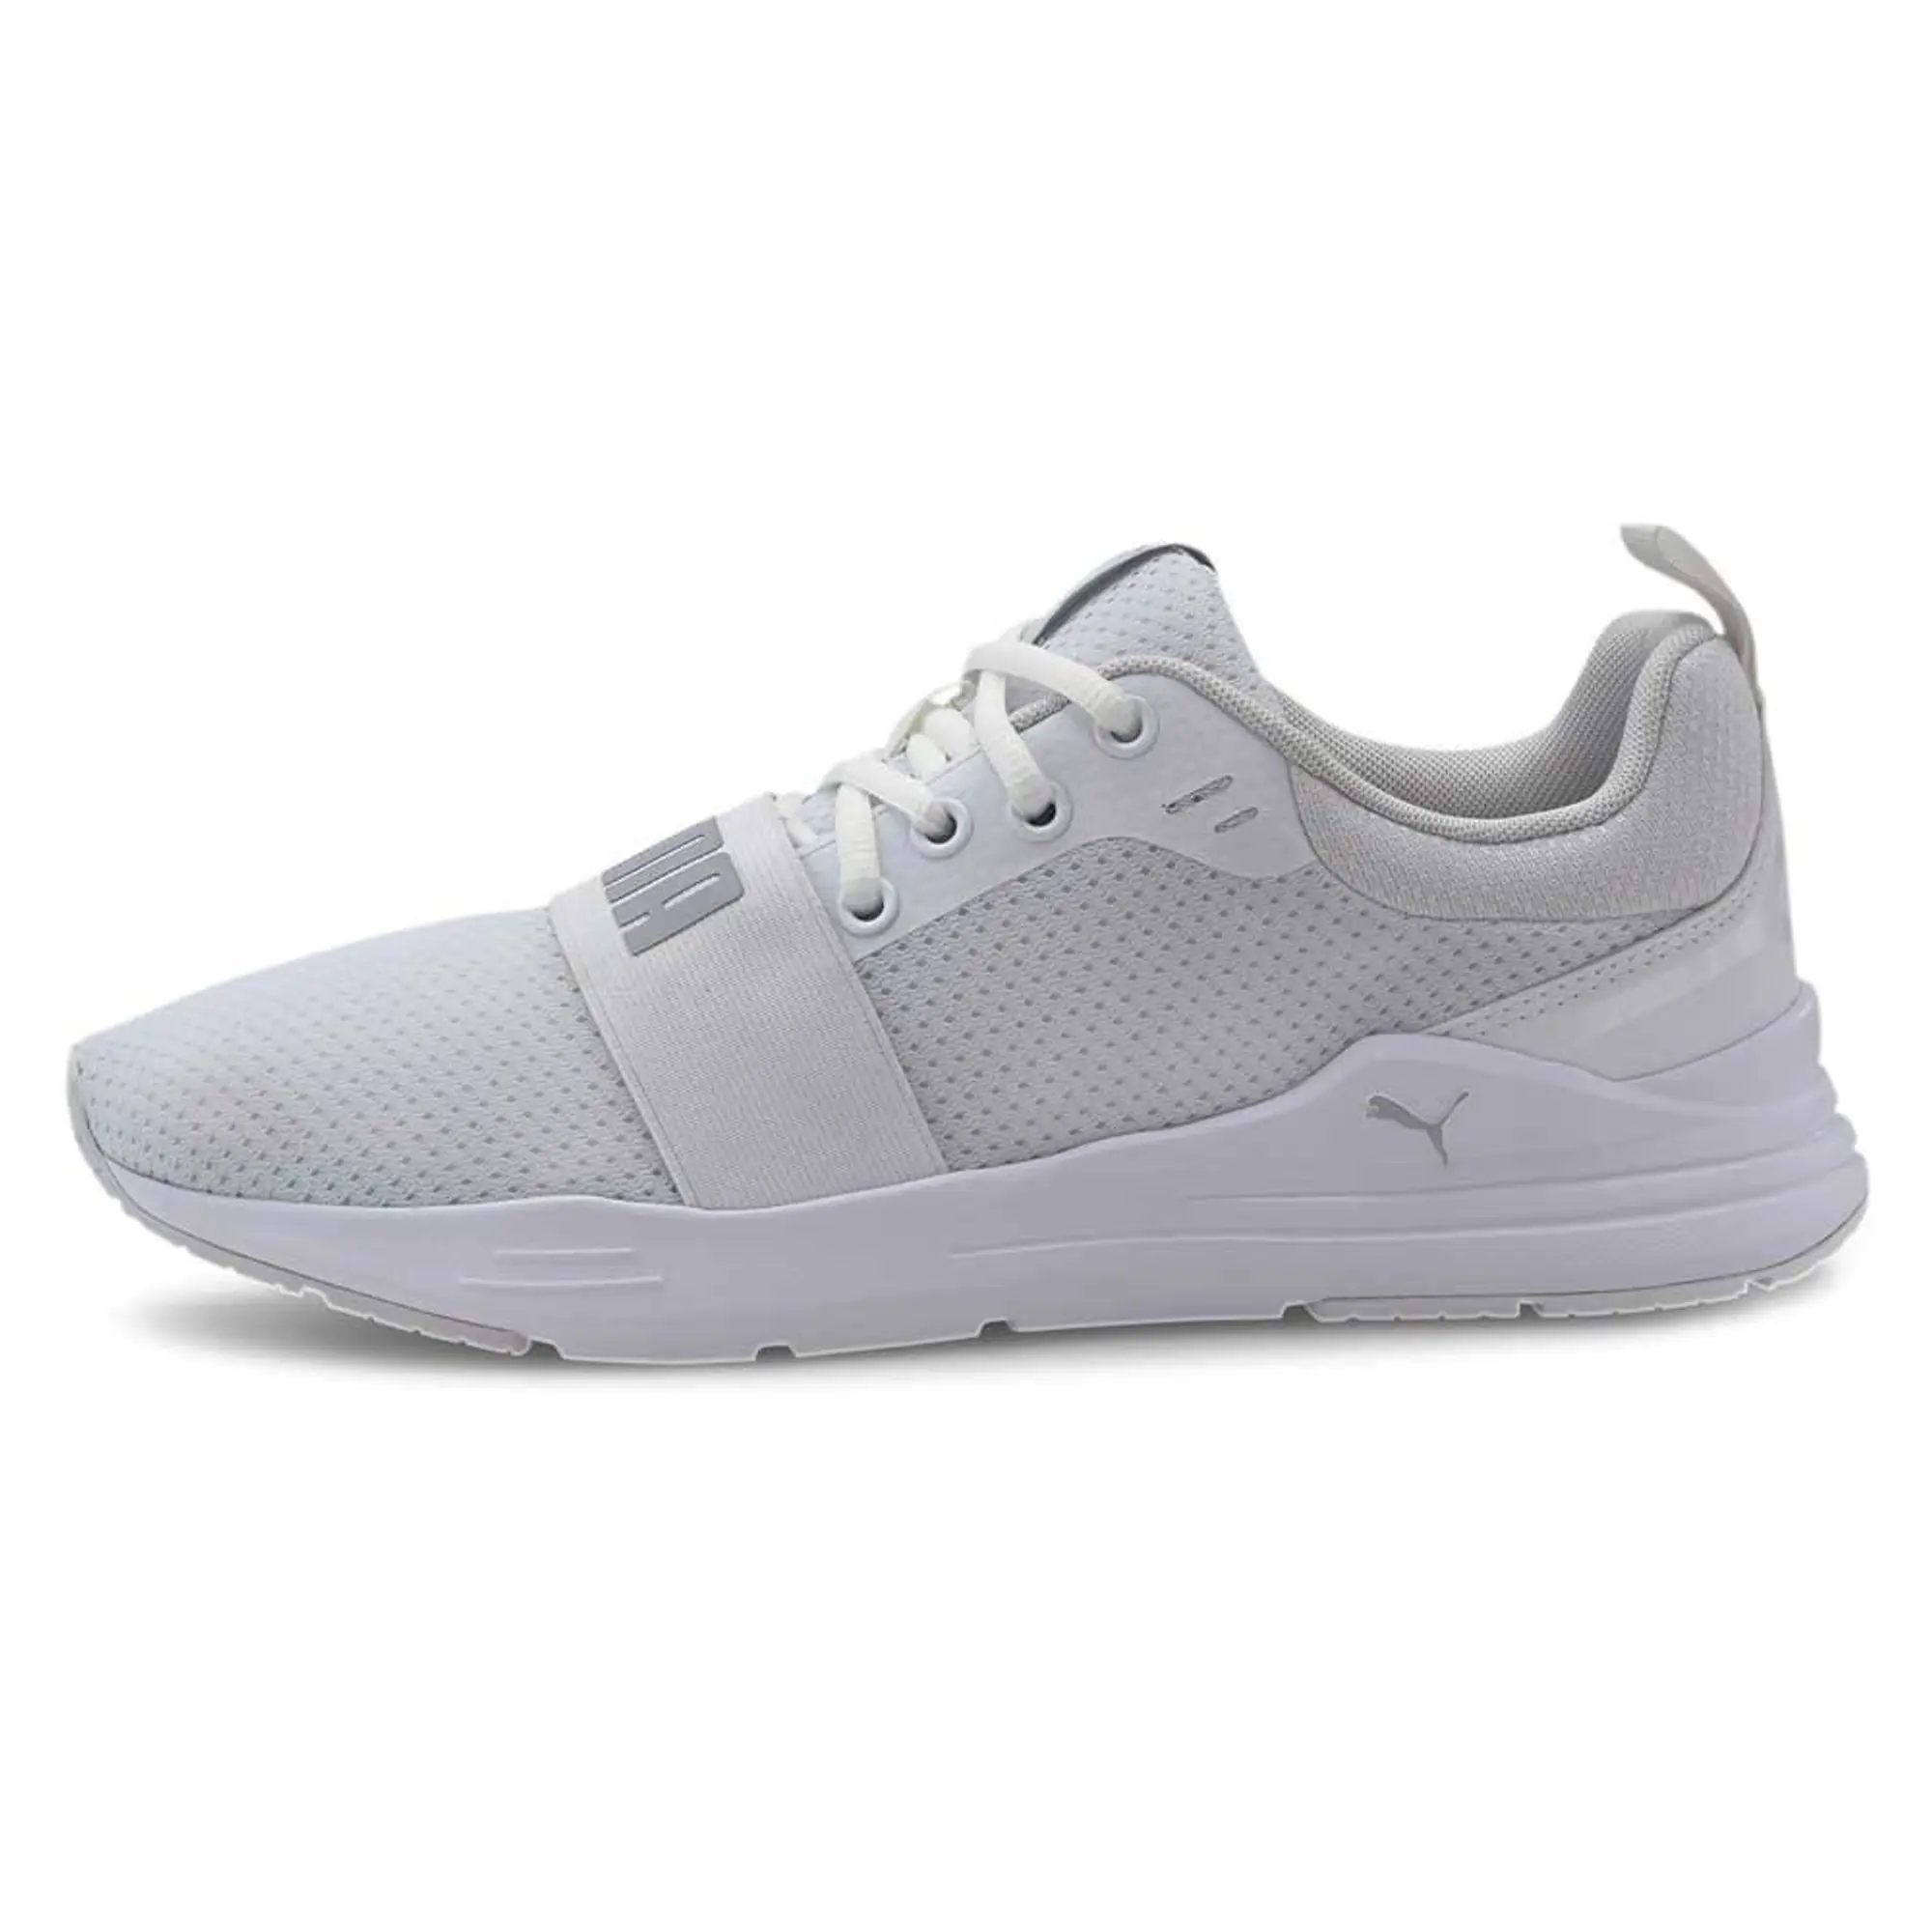 PUMA Wired Trainers, White/Grey Violet